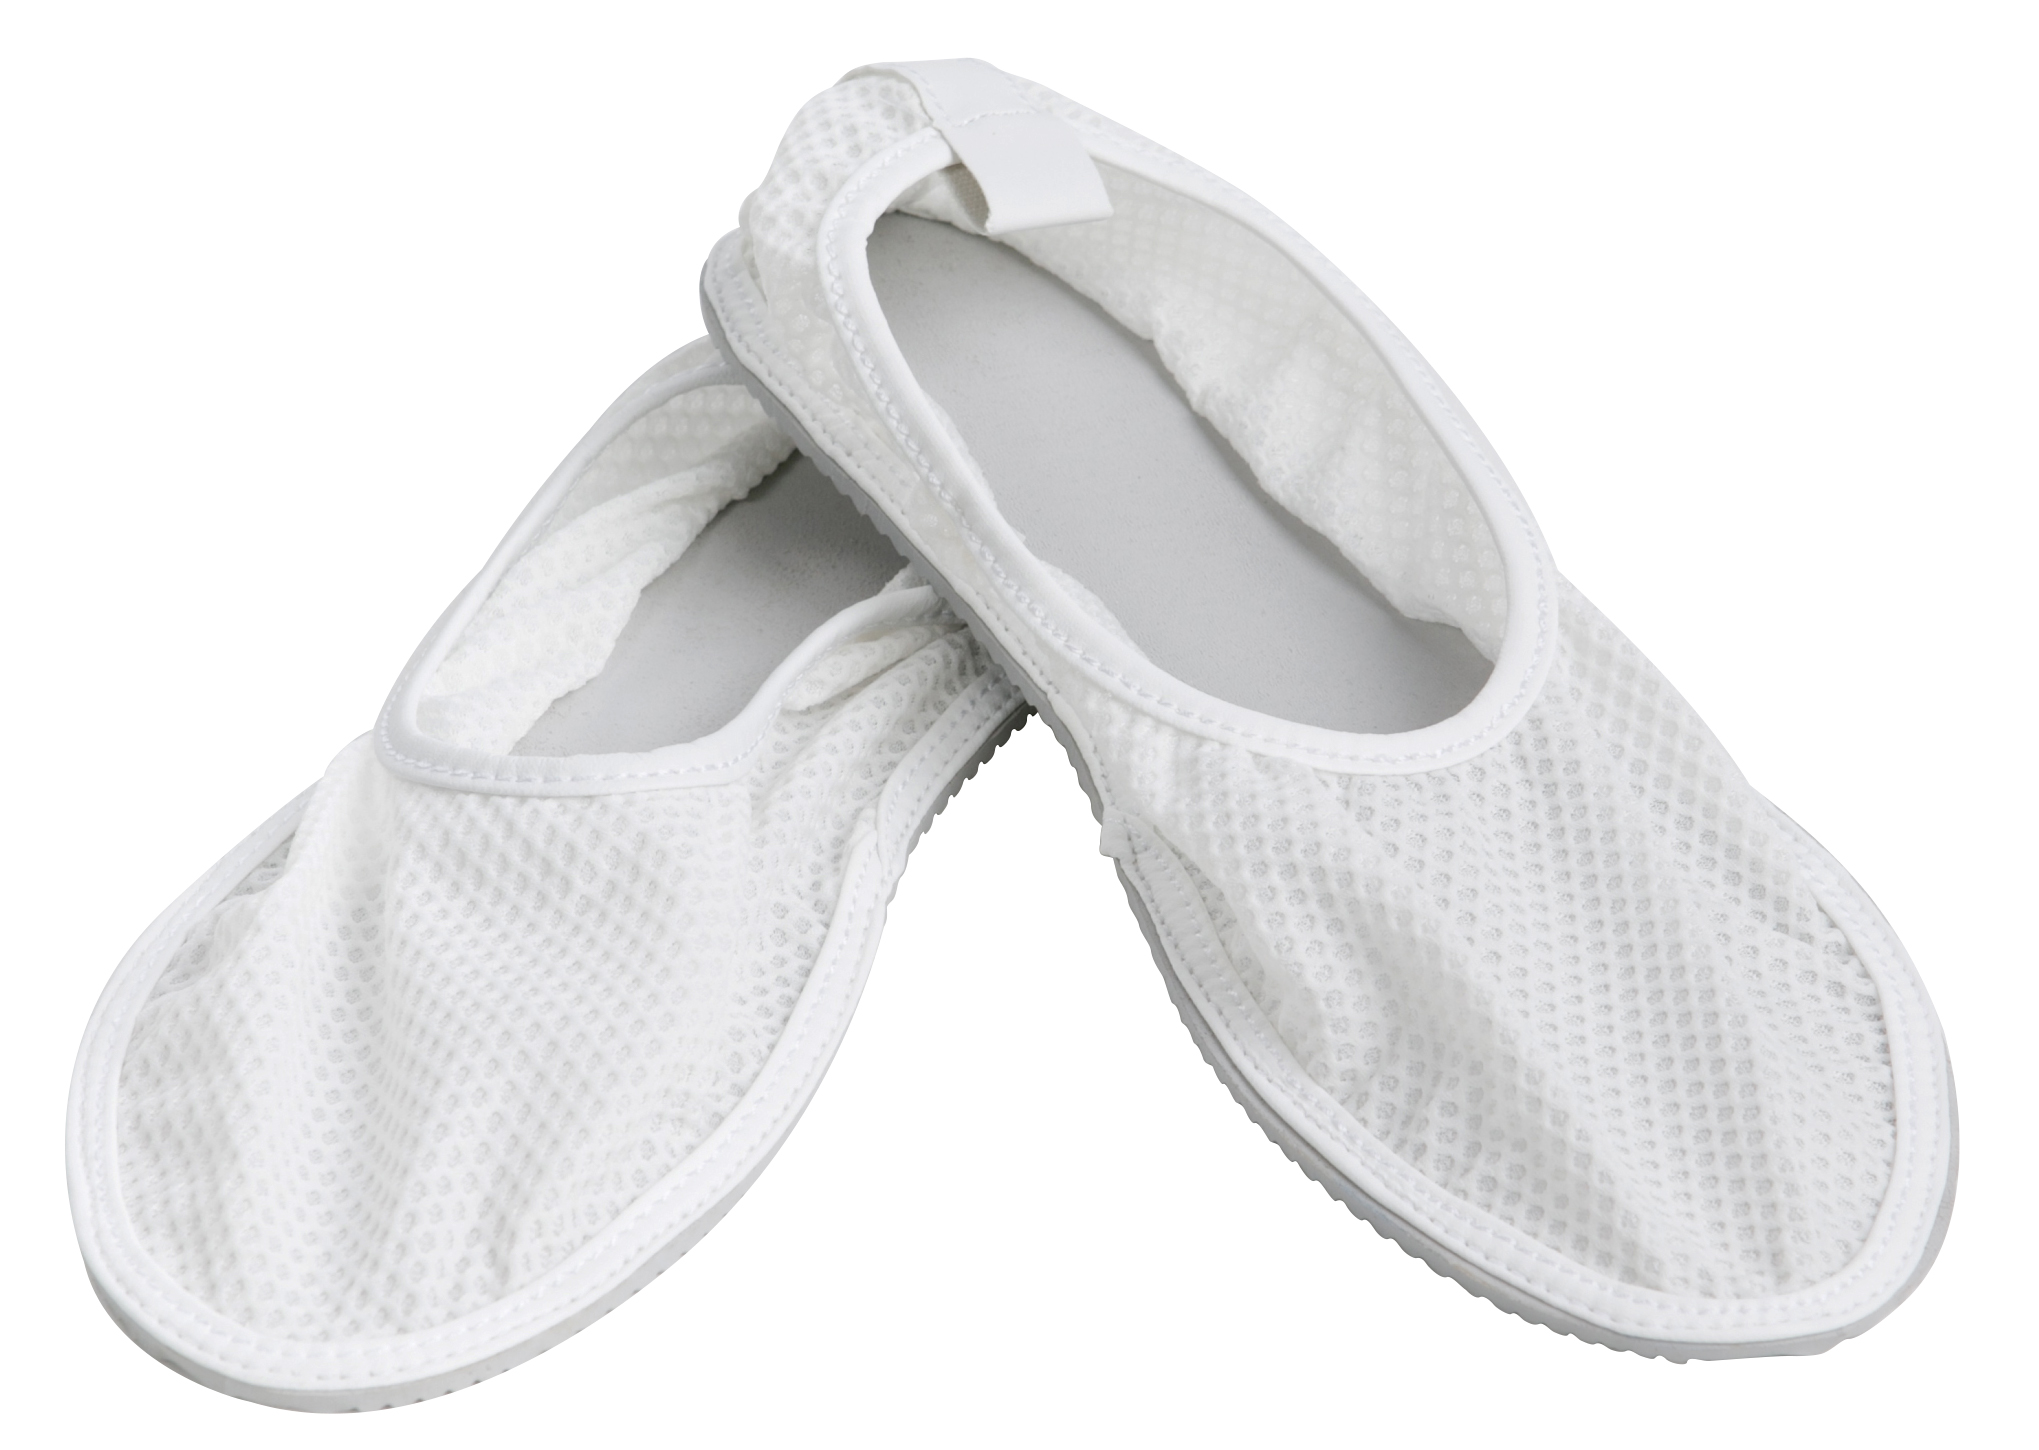 PSC Fall Management Slip-Resistant Shower Shoes - Bowers Medical Supply